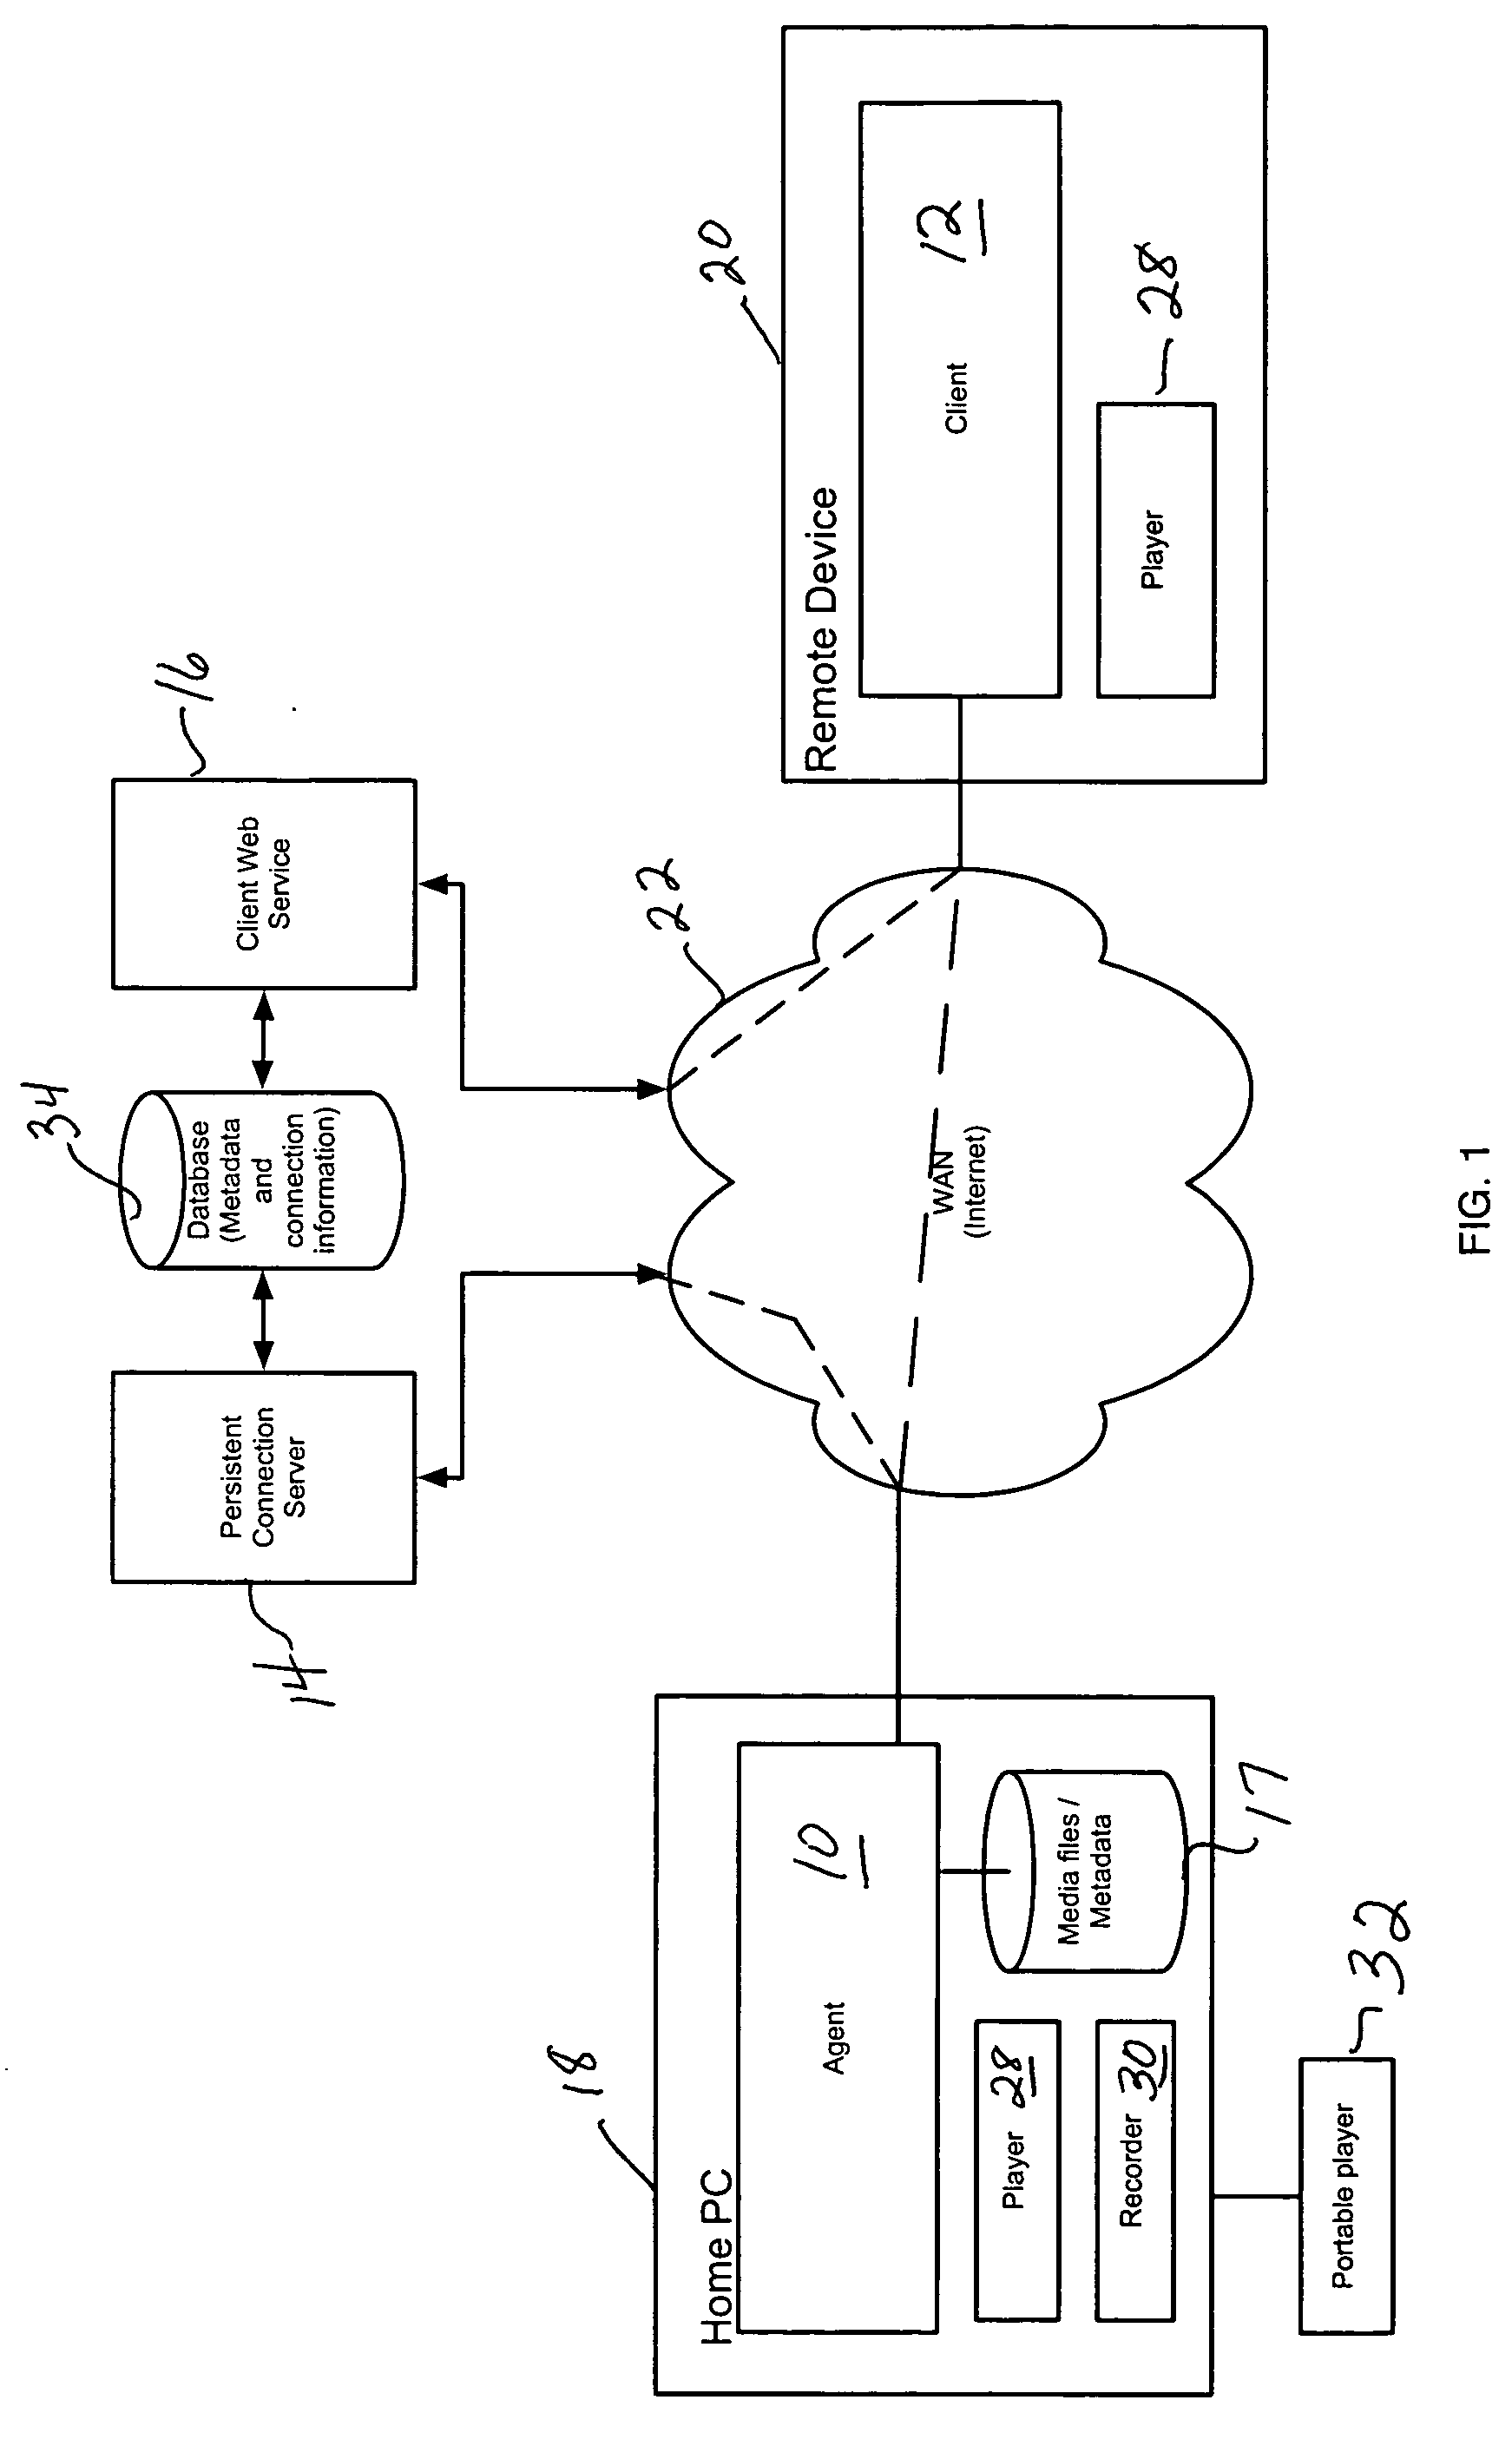 Method and apparatus for assisting with playback of remotely stored media files